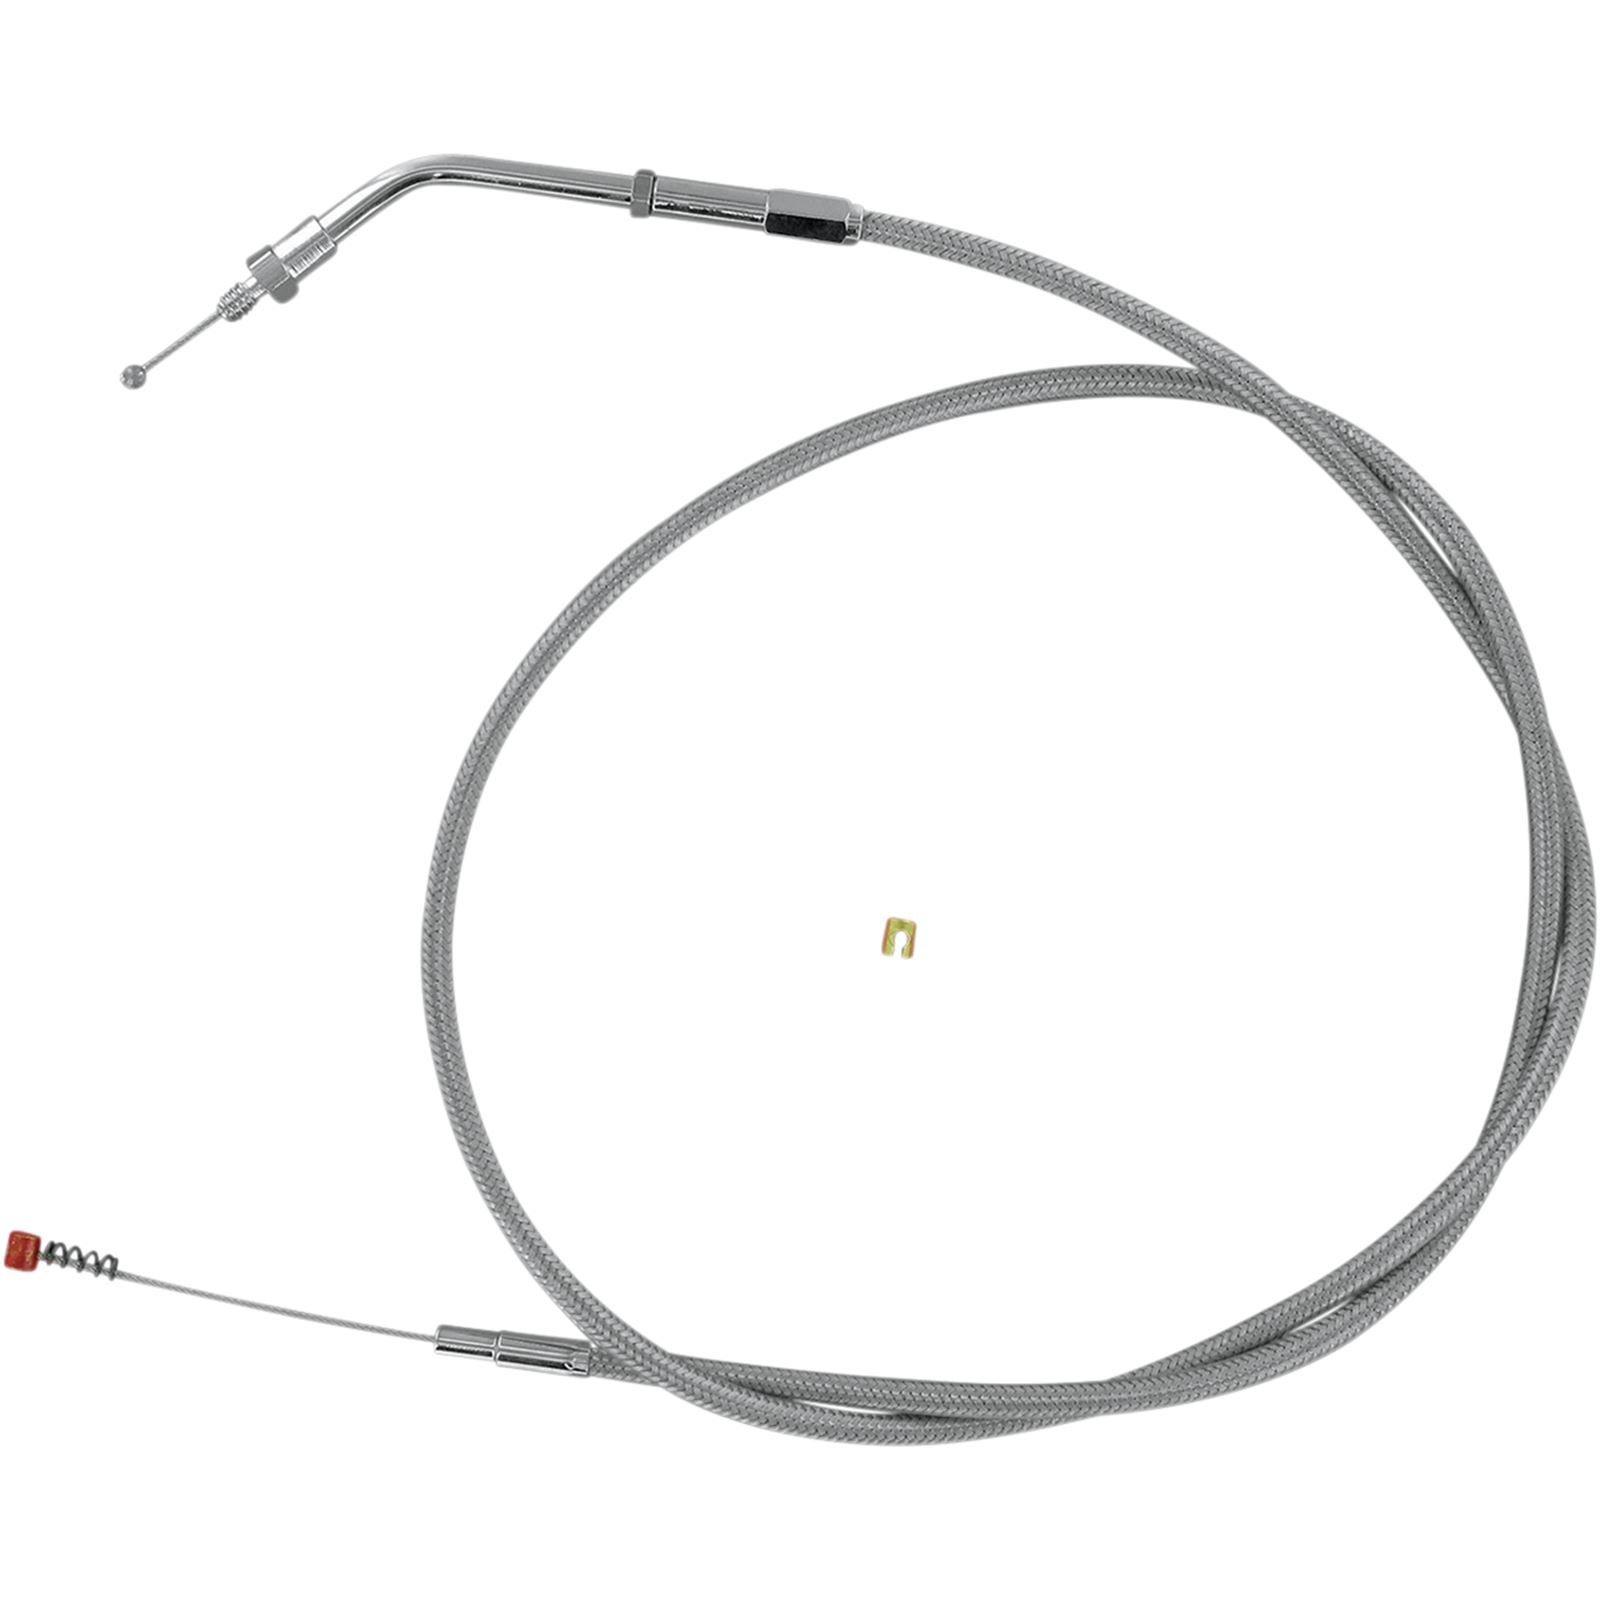 Barnett Performance Extended 6" Stainless Steel Idle Cable for '81 - '89 FL/FX/XL